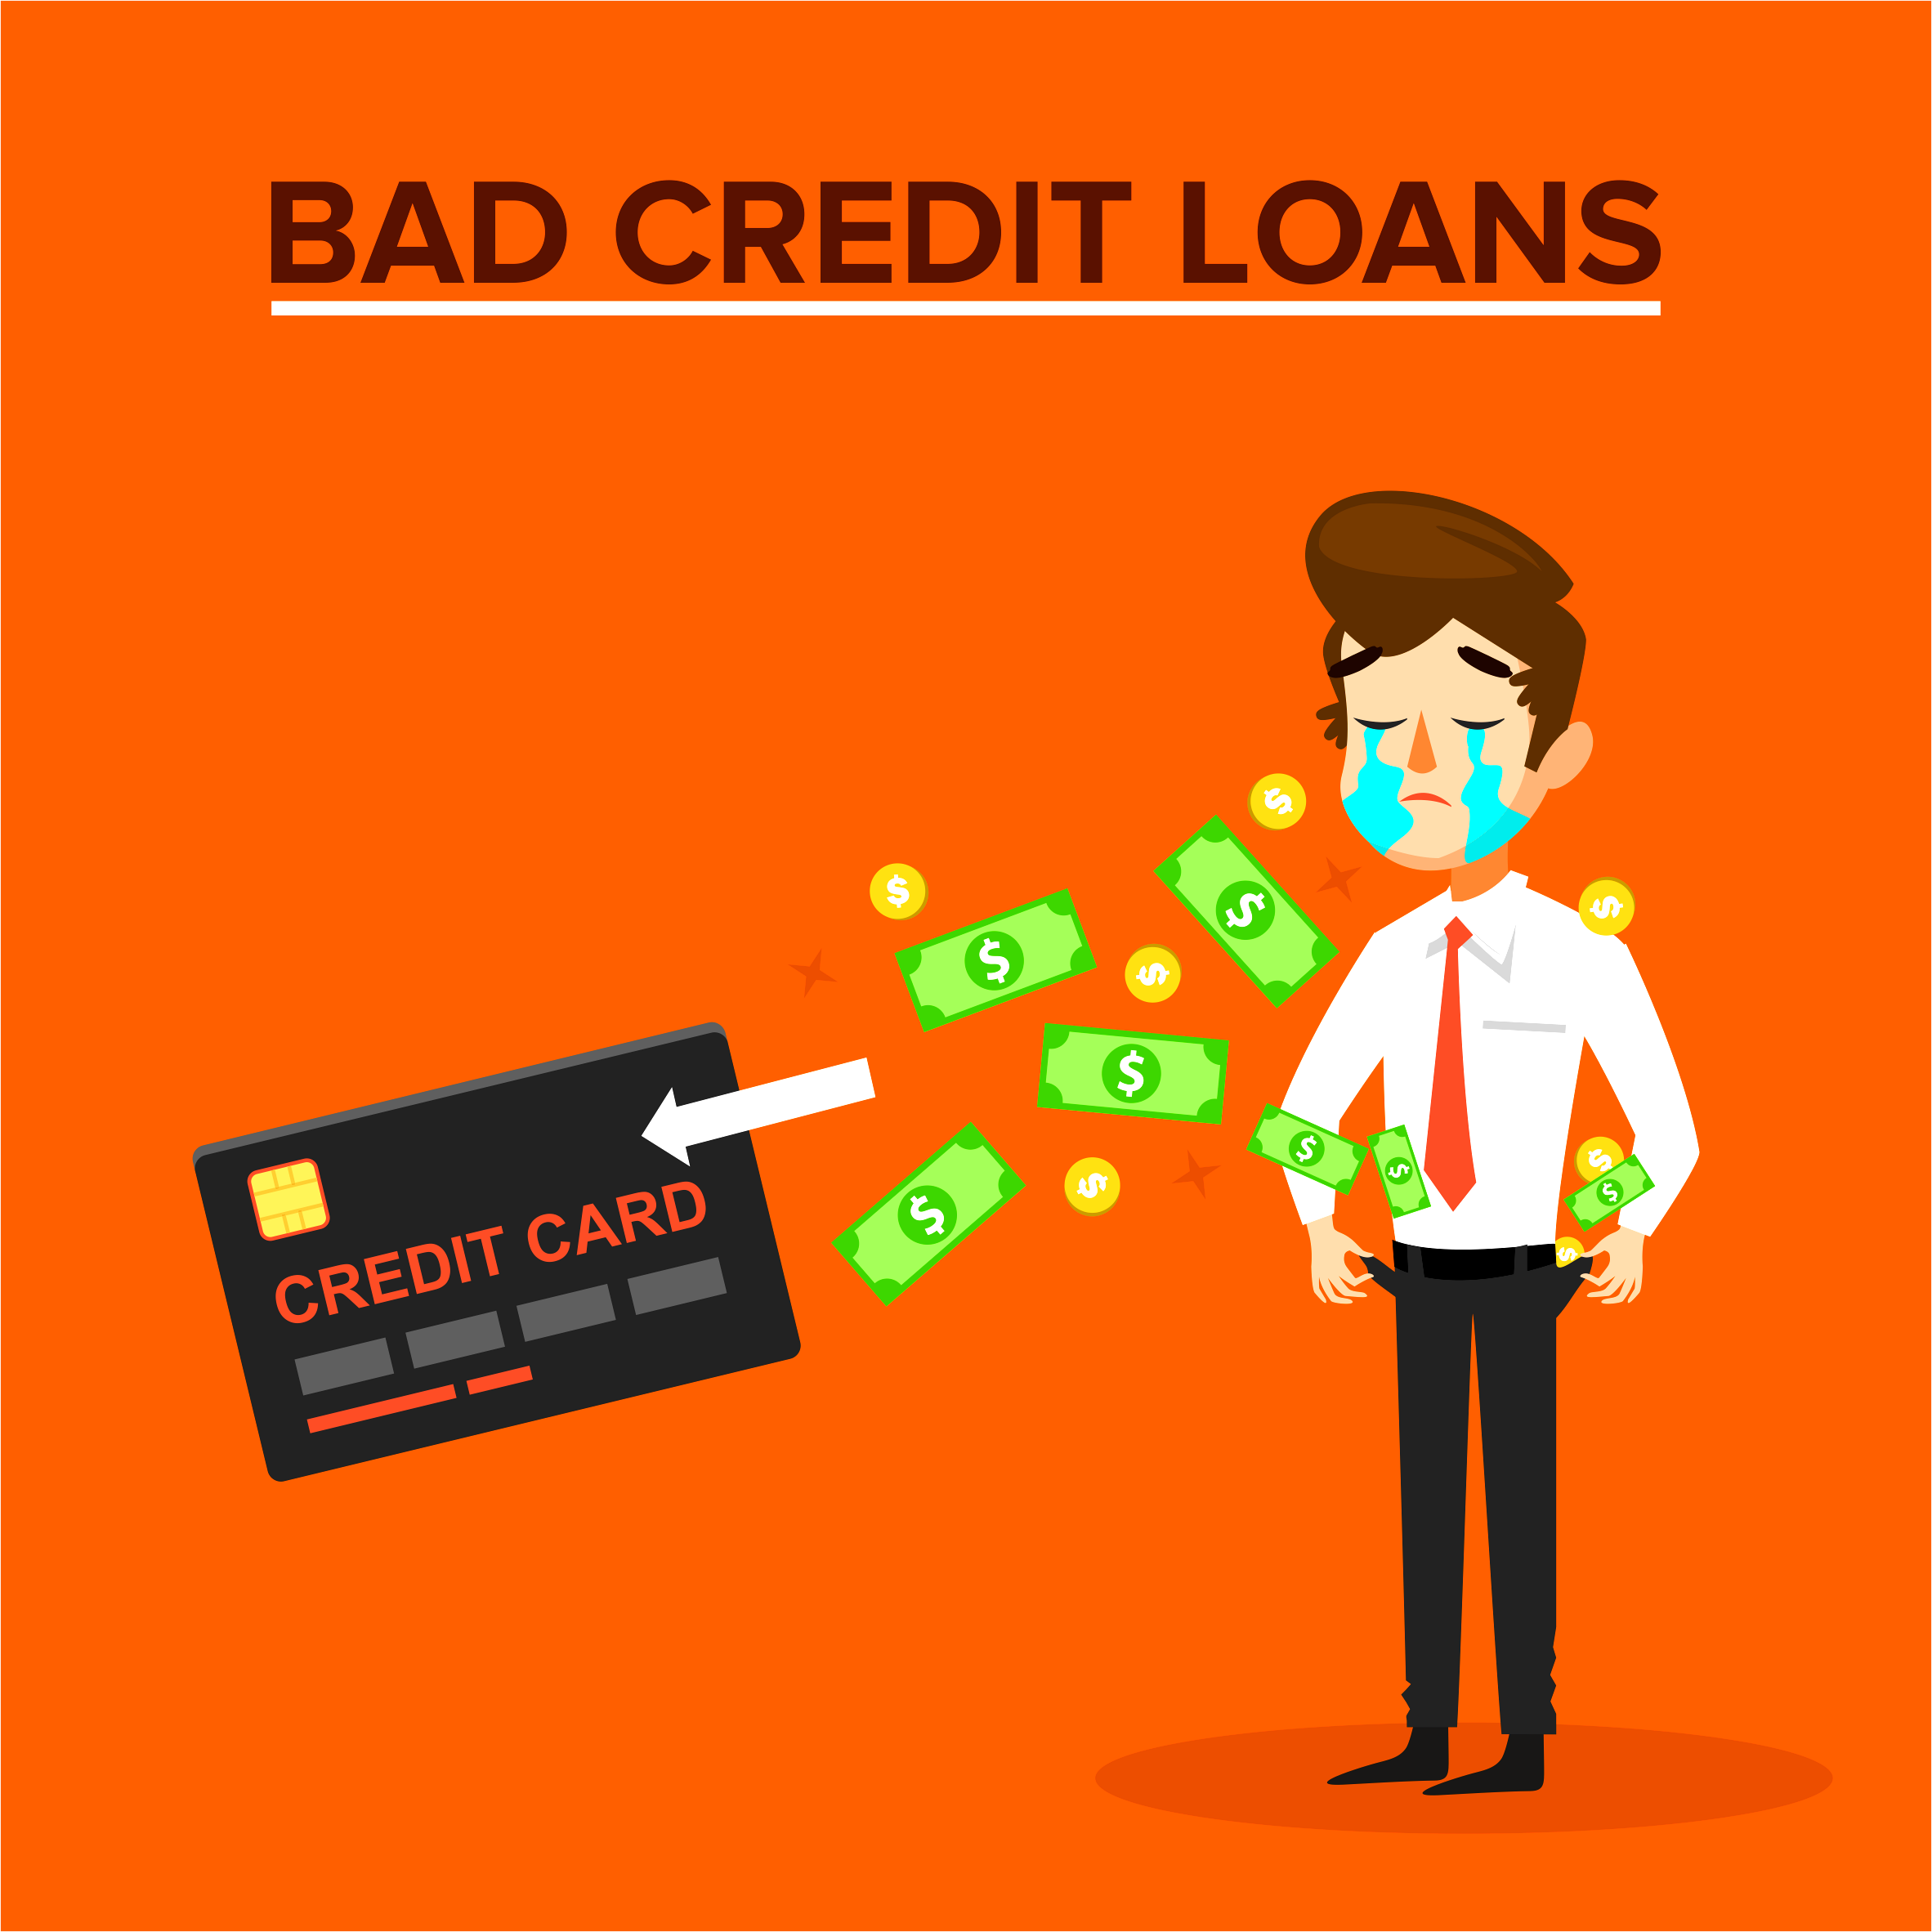 How to Get Bad Credit Loans in Canada?